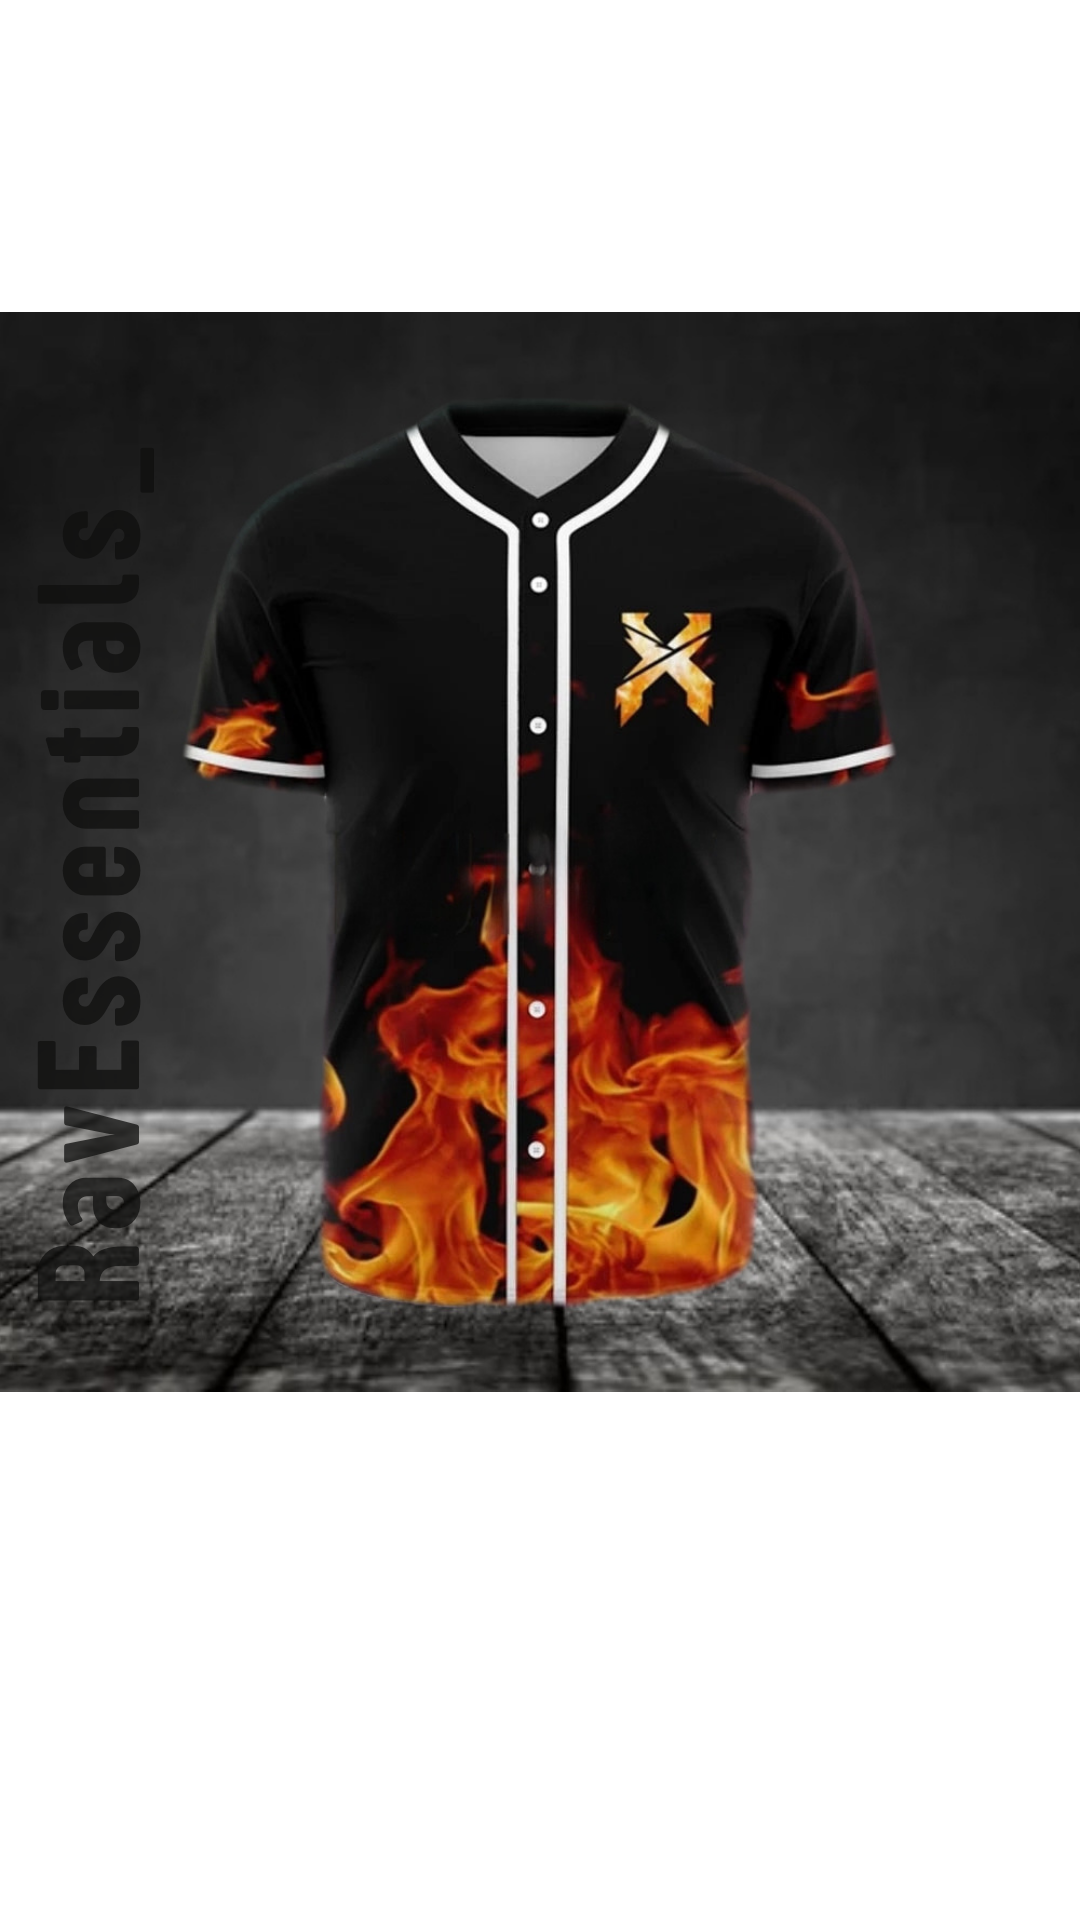 Excision Fire Rave Jersey